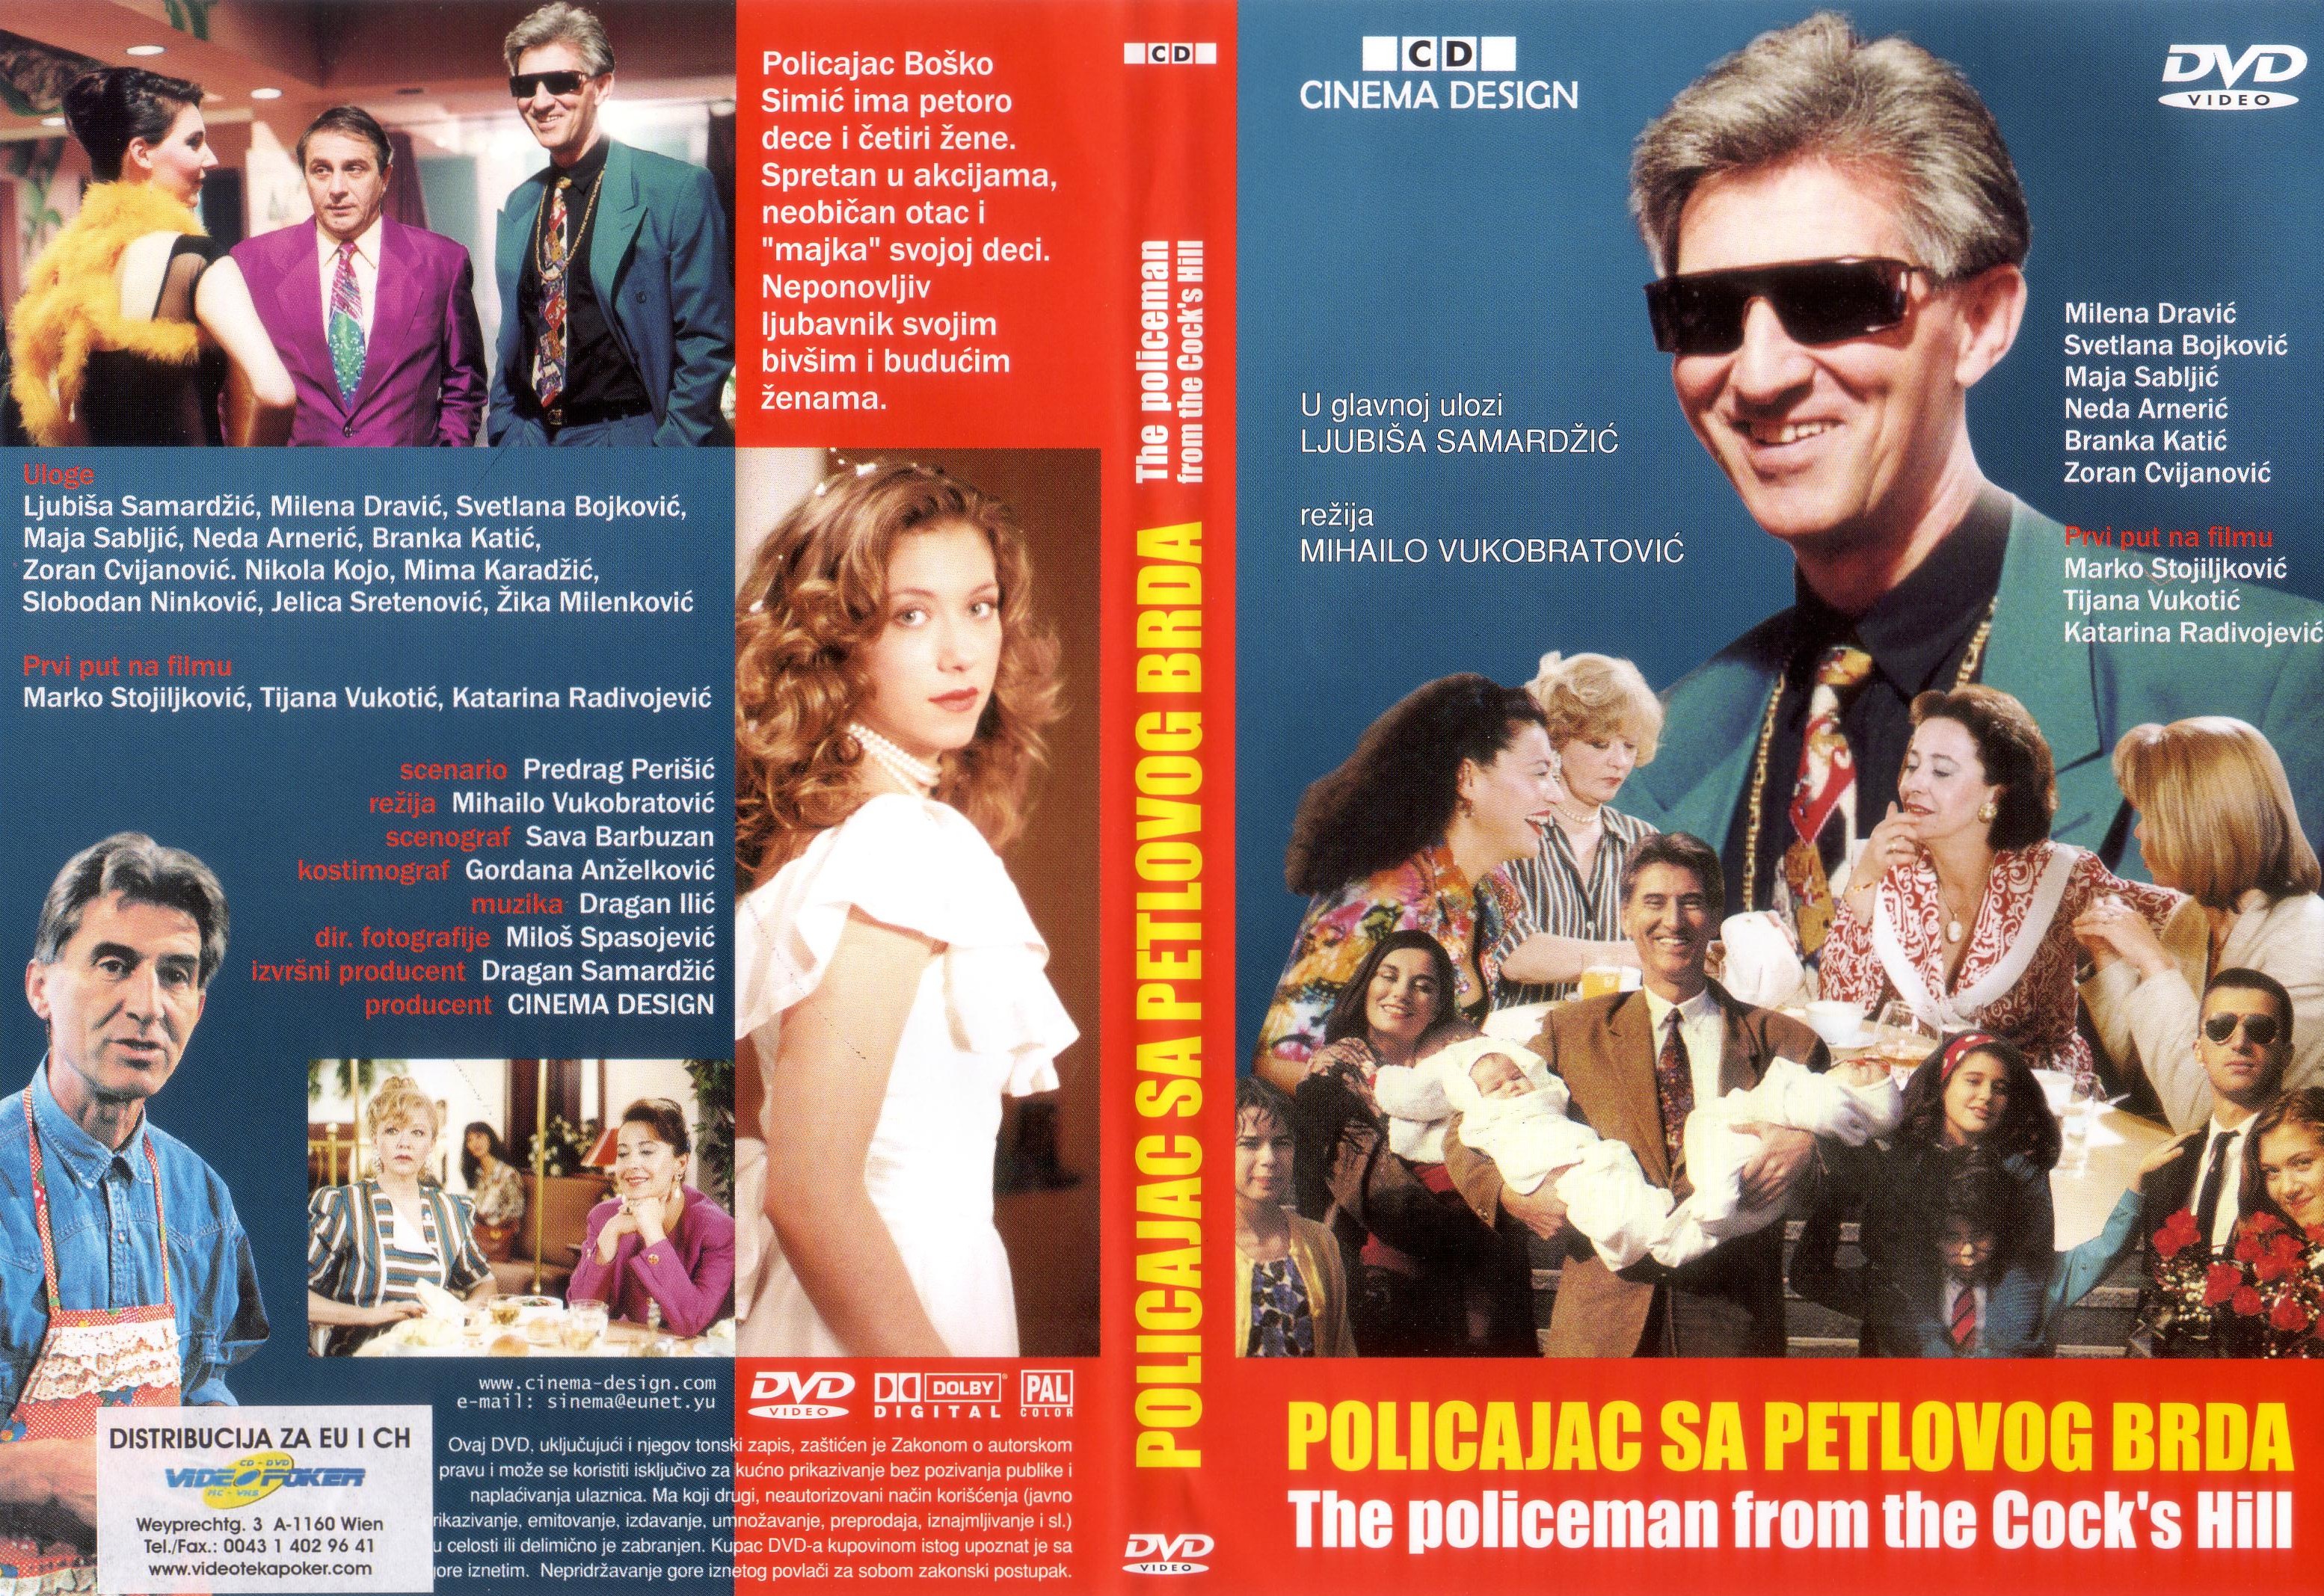 Click to view full size image -  DVD Cover - P - DVD - POLICAJAC SA PETLOVOG BRDA - DVD - POLICAJAC SA PETLOVOG BRDA.JPG